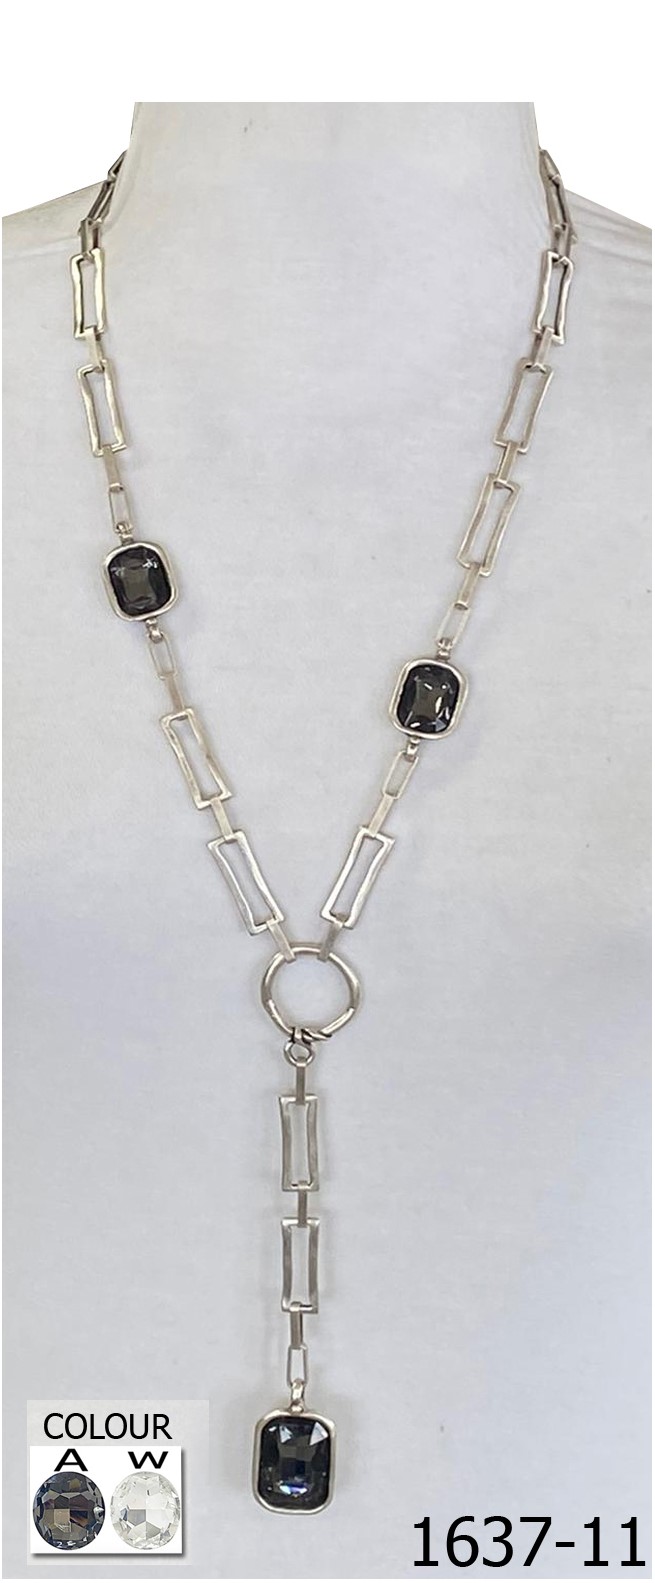 NECKLACE 1637-11